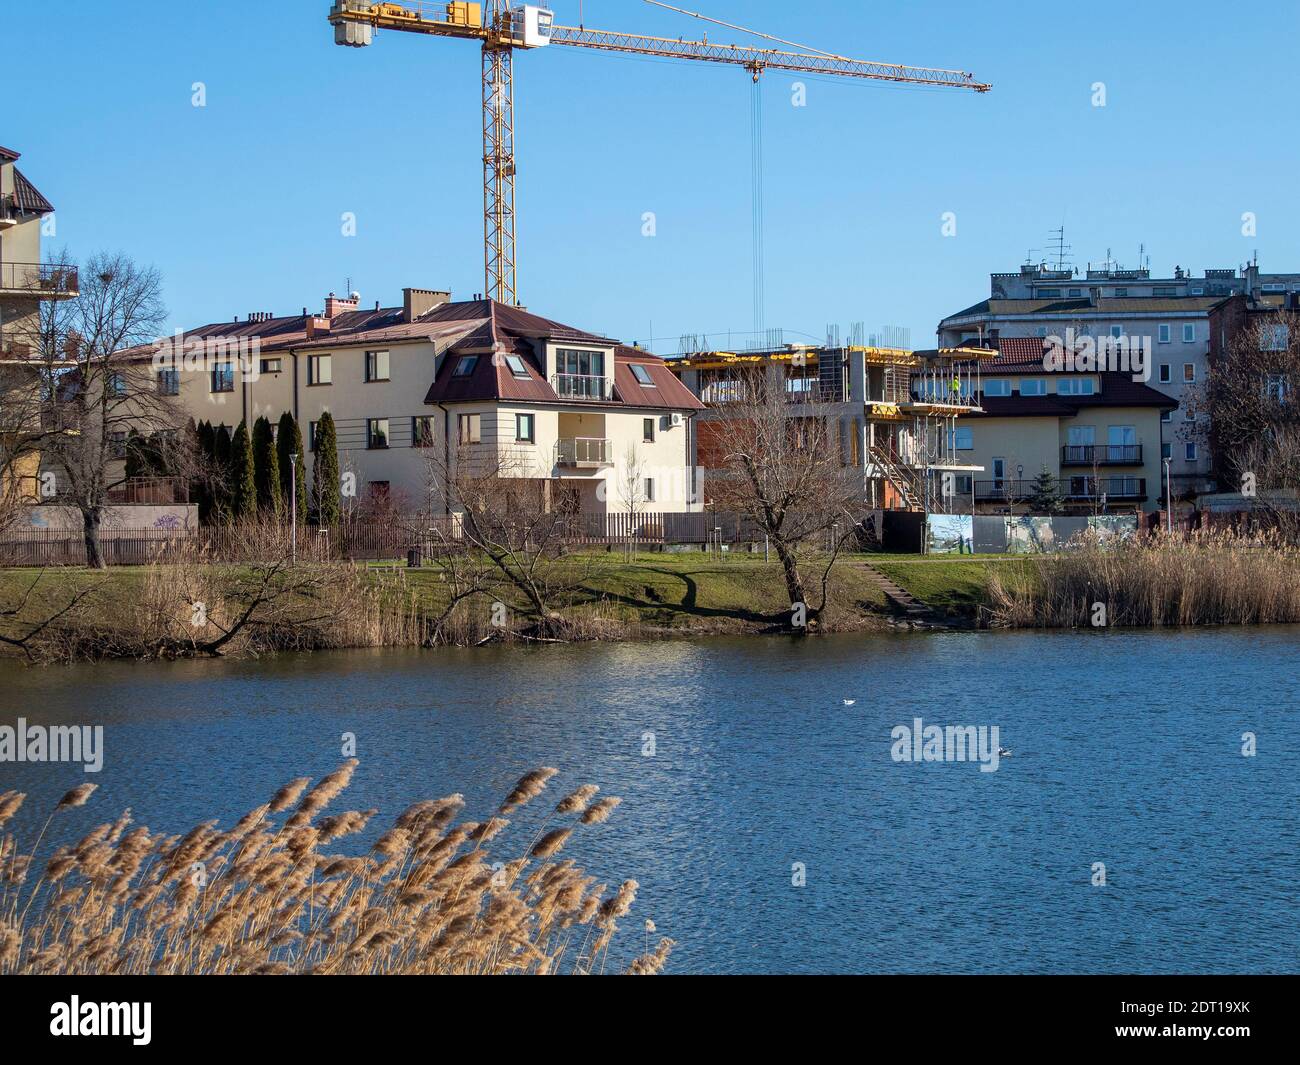 Illegal construction of a high-rise building in a city park near a river Stock Photo